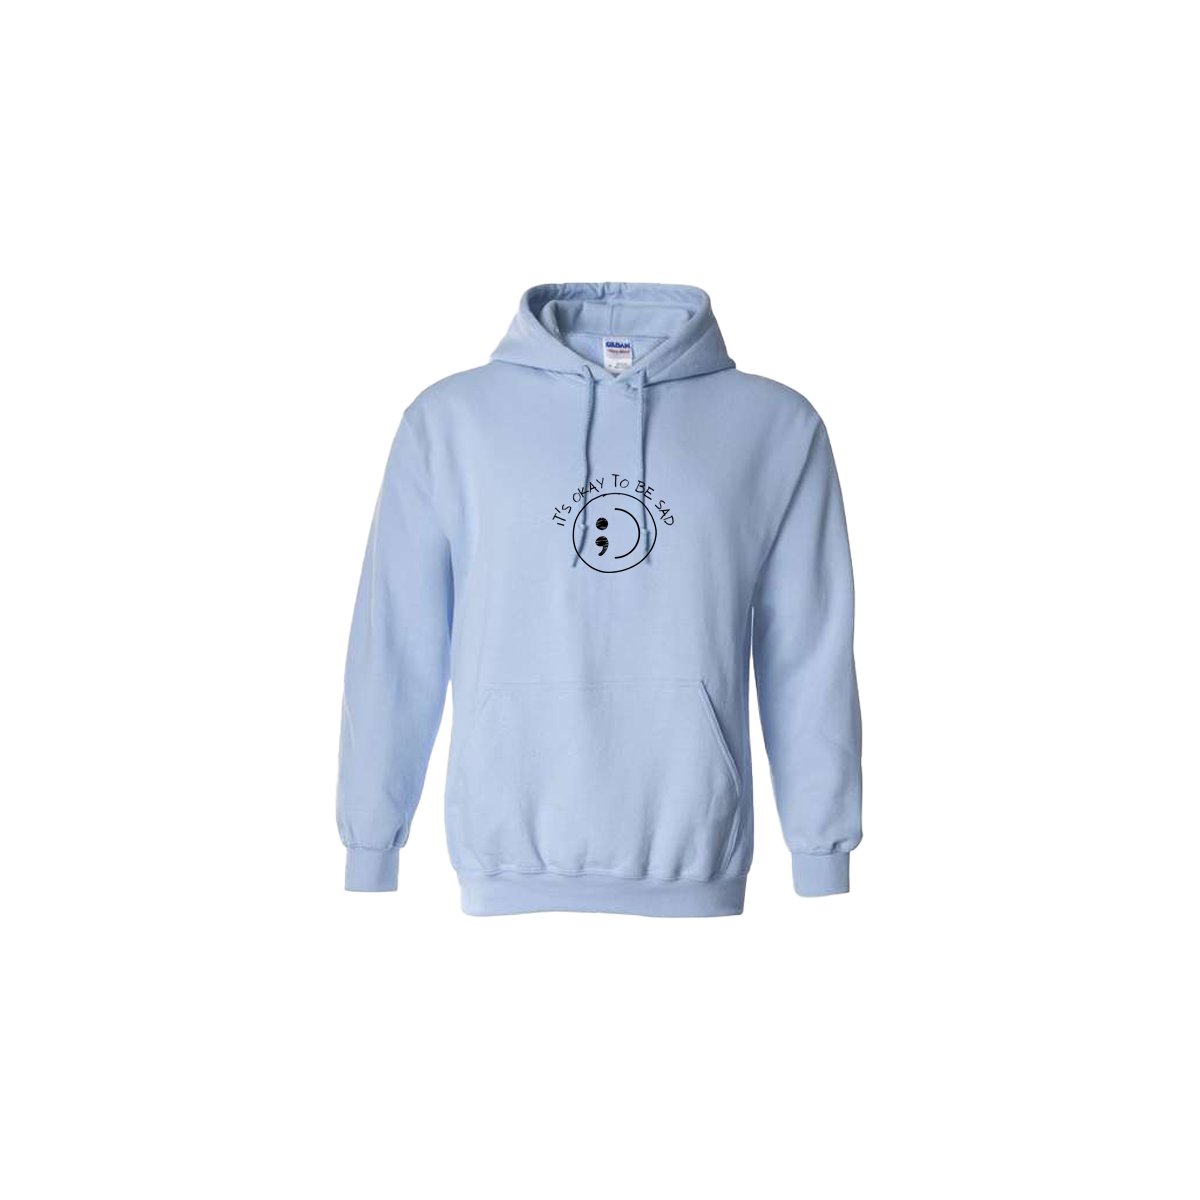 It's Okay to be Sad Embroidered Light Blue Hoodie - Mental Health Awareness Clothing